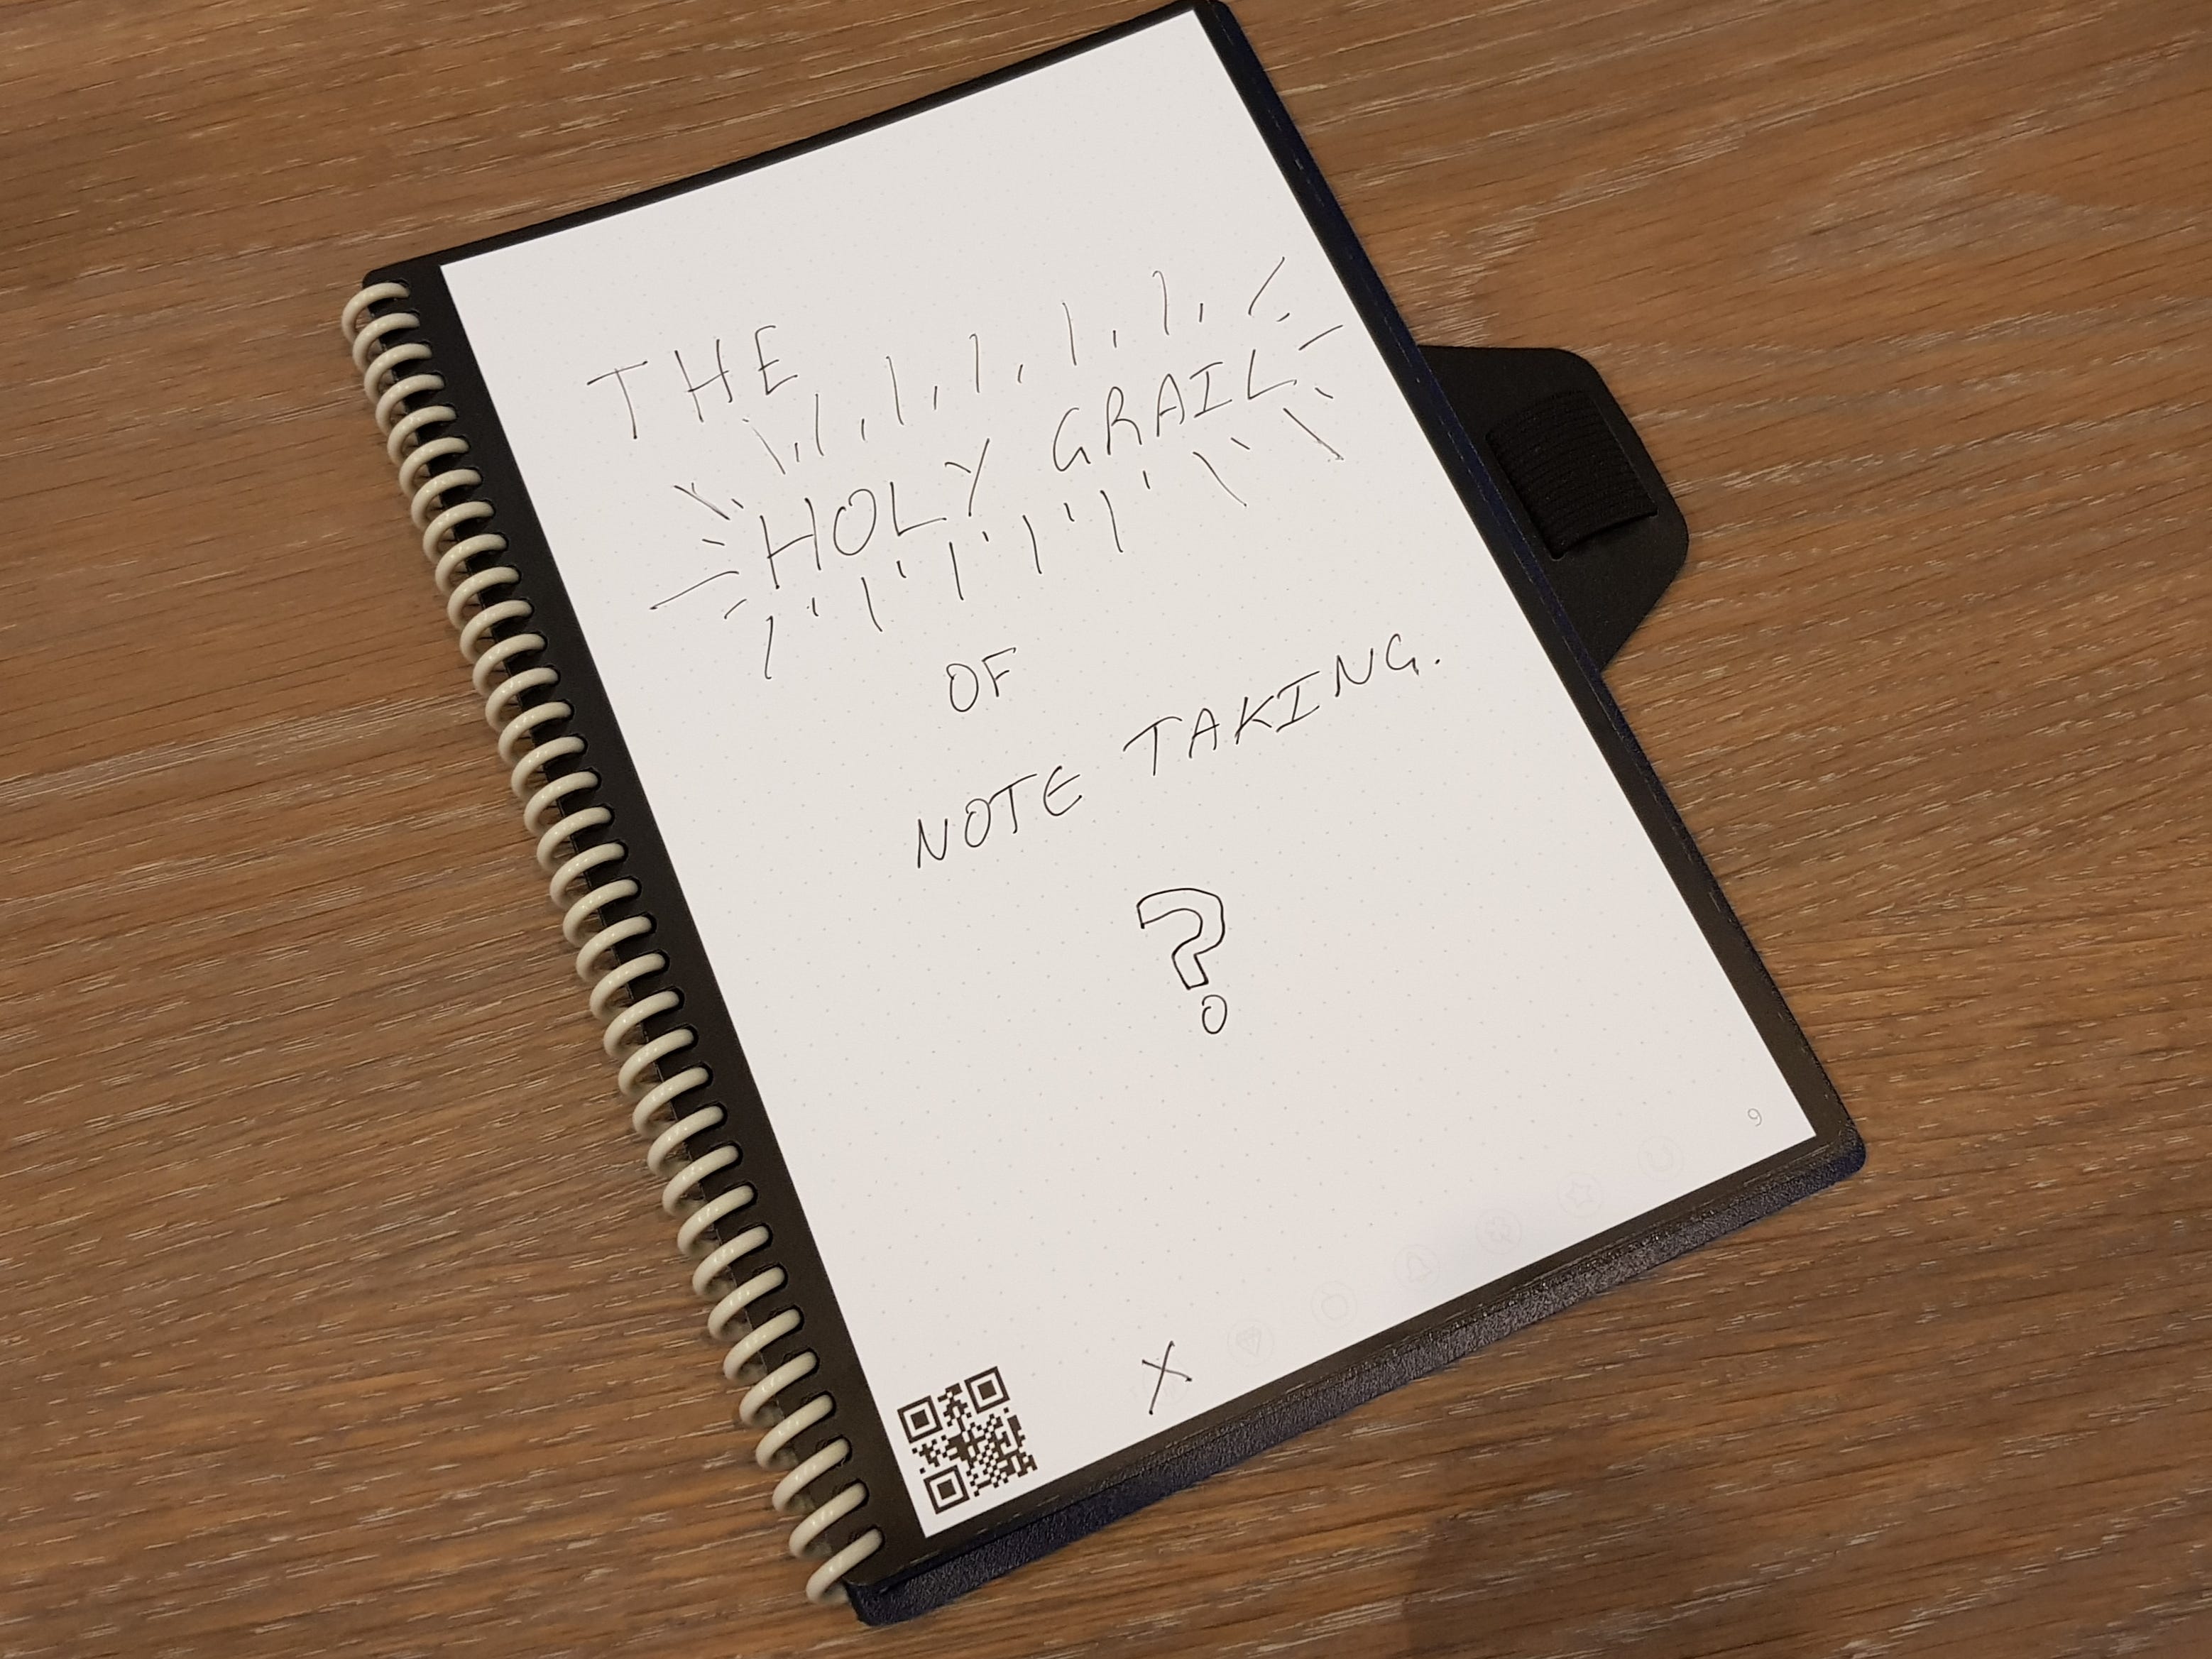 Rocketbook Everlast: The best thing since pen & paper?